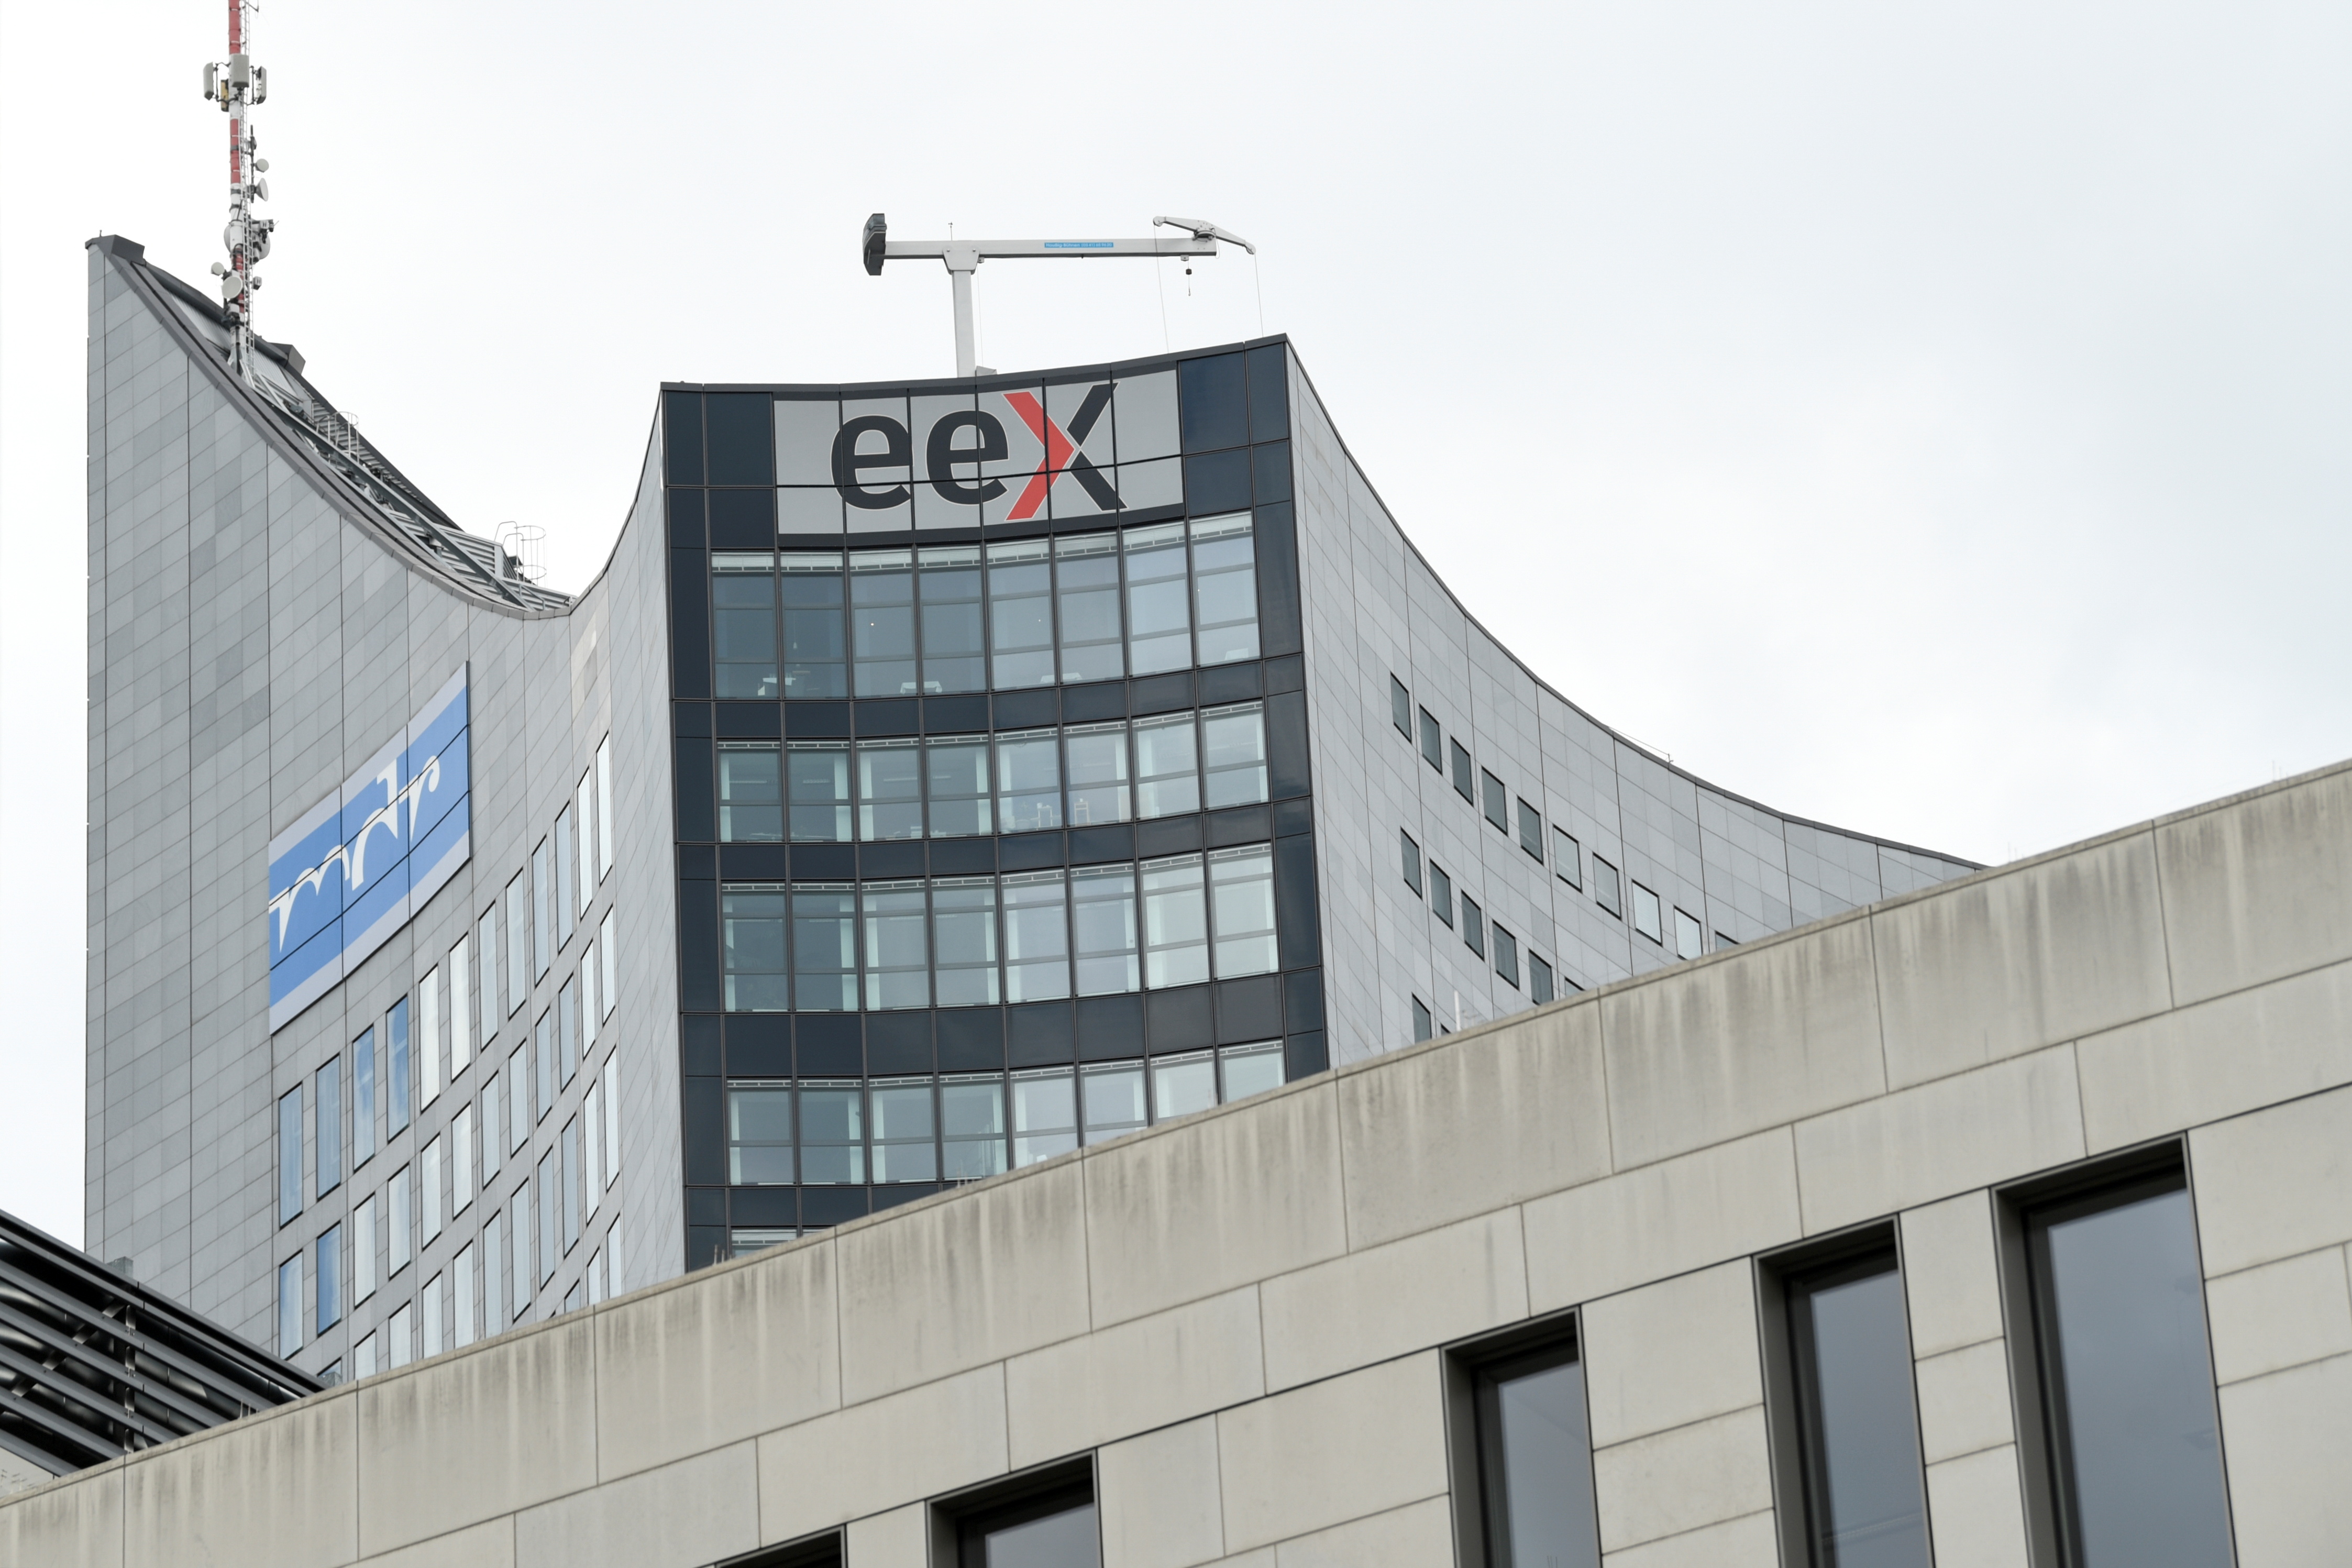 The logo of the European Energy Exchange (EEX), world's biggest online power trading platform is pictured at the headquarters in a centre-of-town high-rise office building in Leipzig